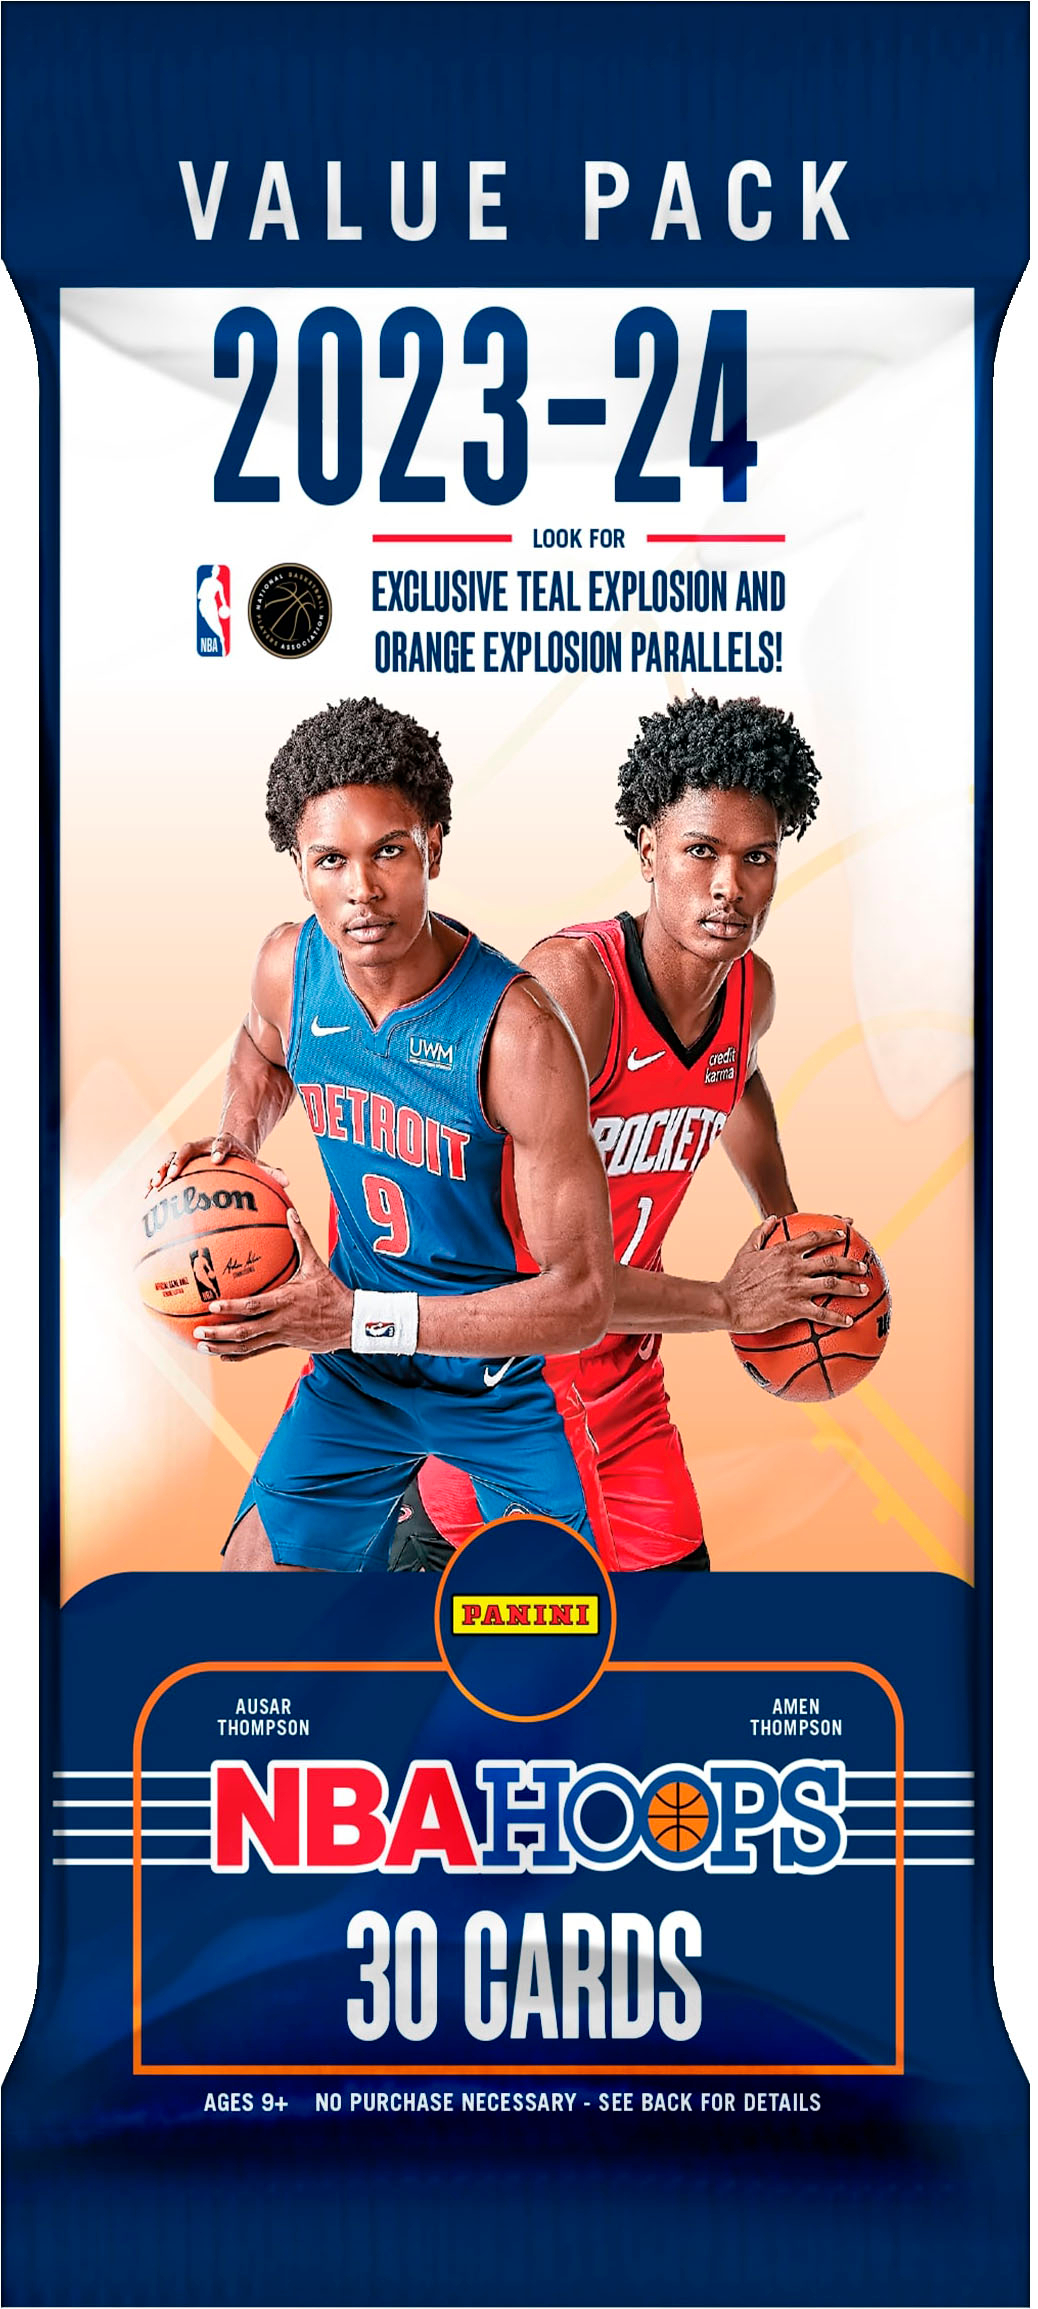 WEMBY x2!! ❄️ 2023-24 Panini NBA Hoops Winter Blaster (and Fat Packs!)  Review 